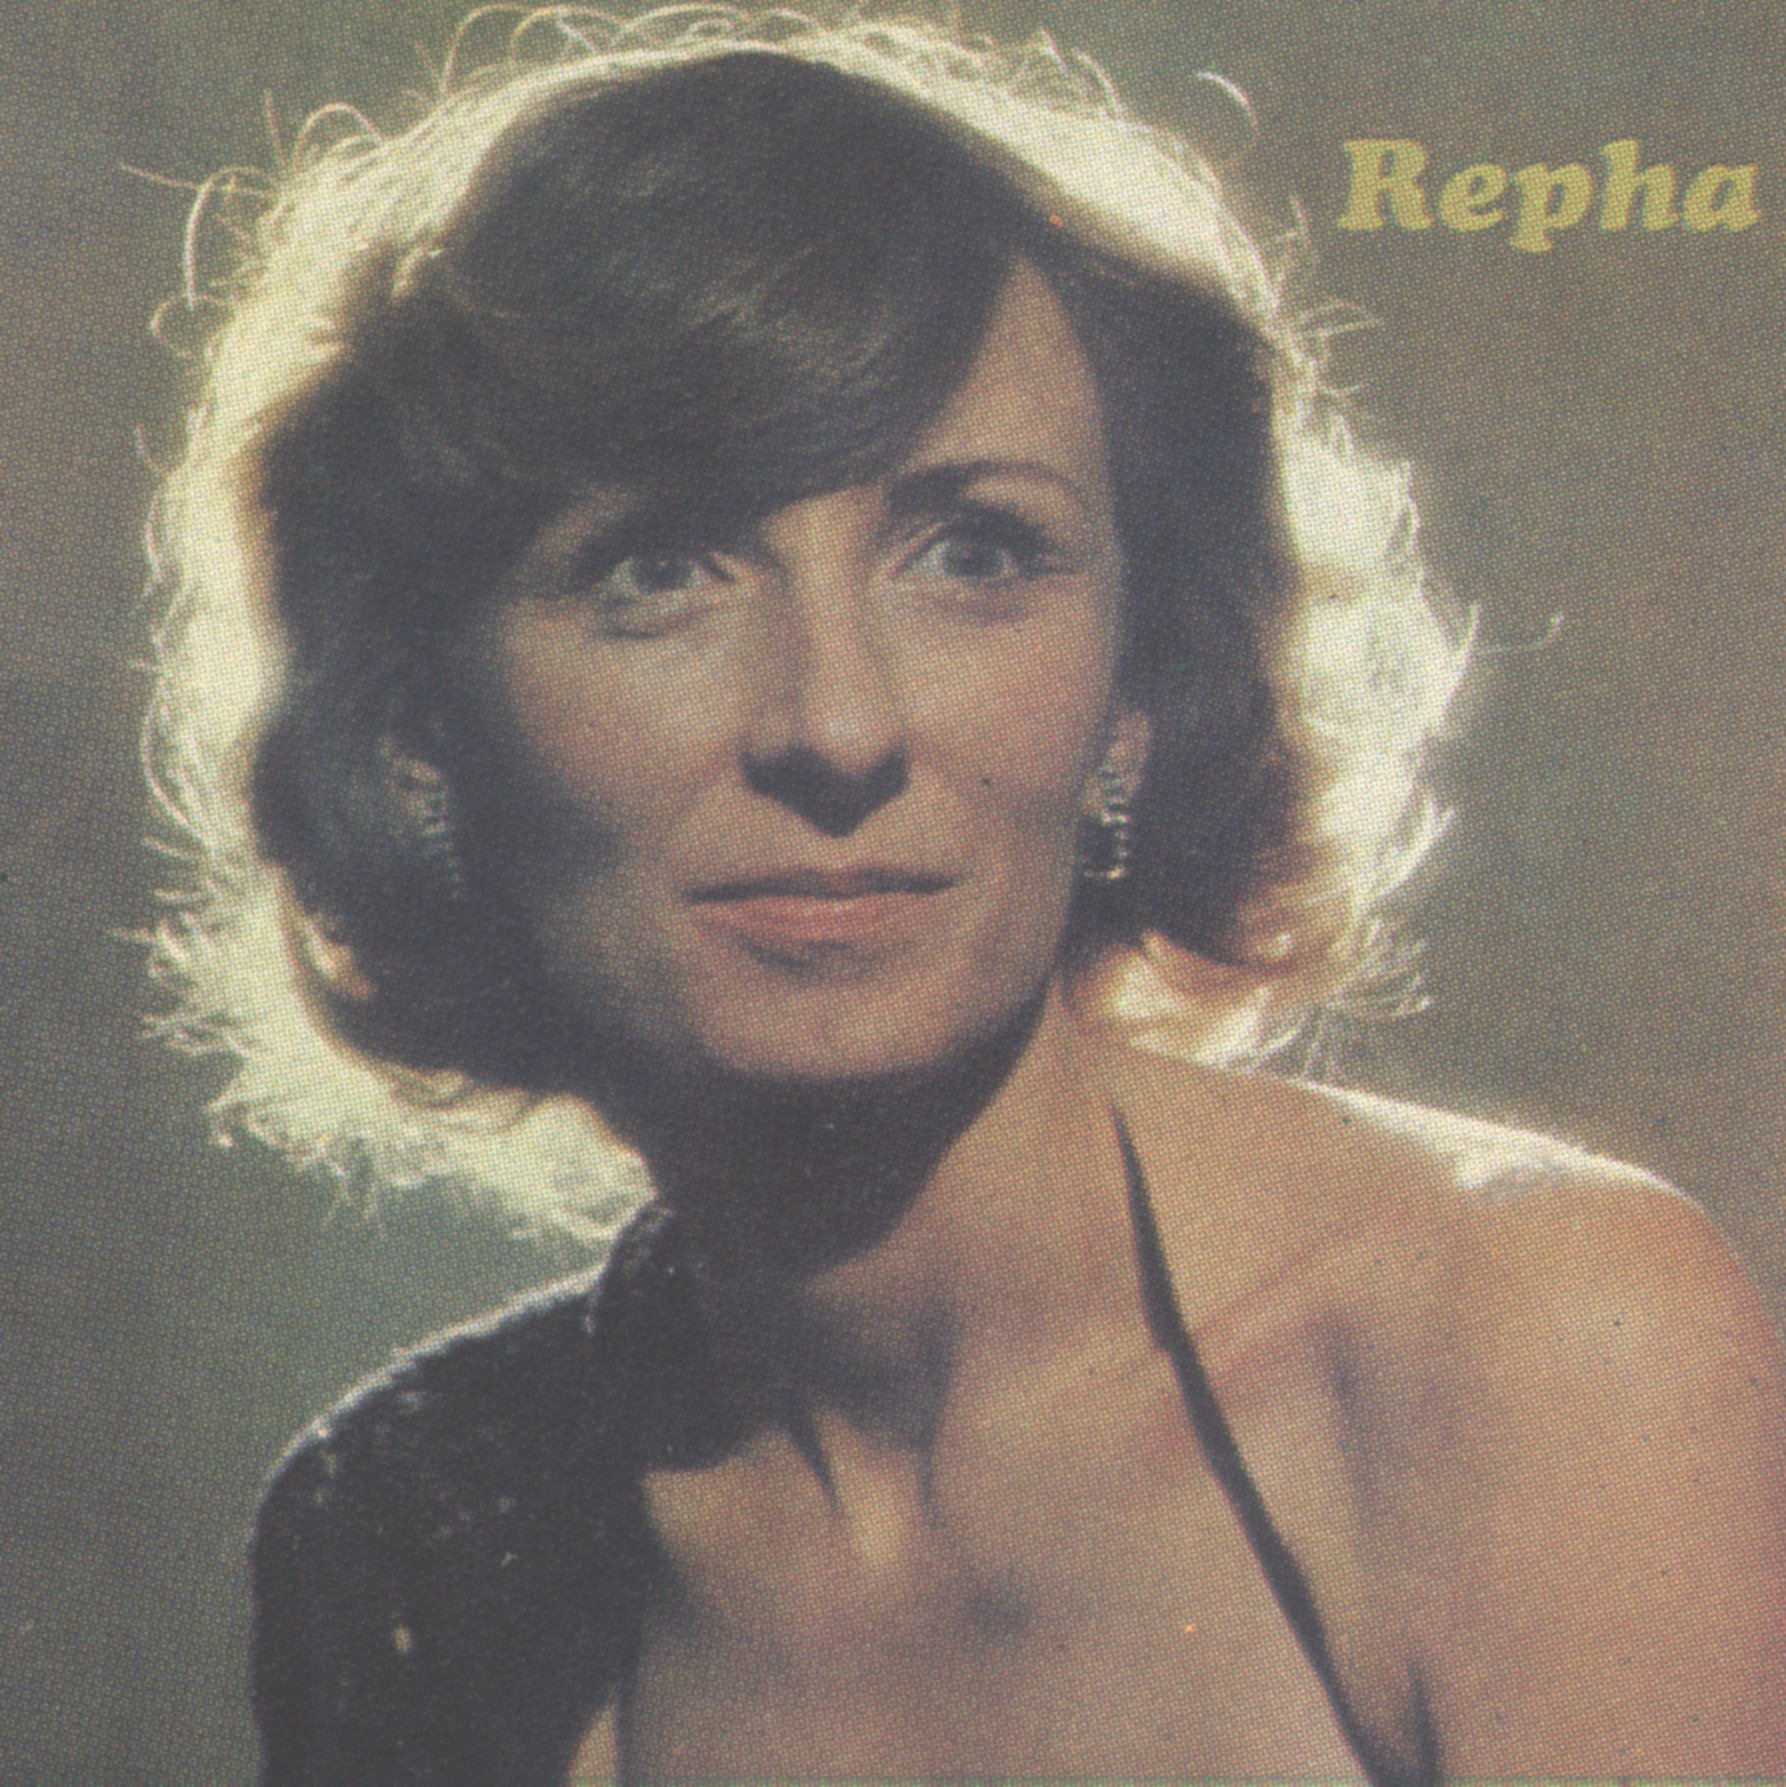 Picture of Repha Buckman, from the Cover of Repha